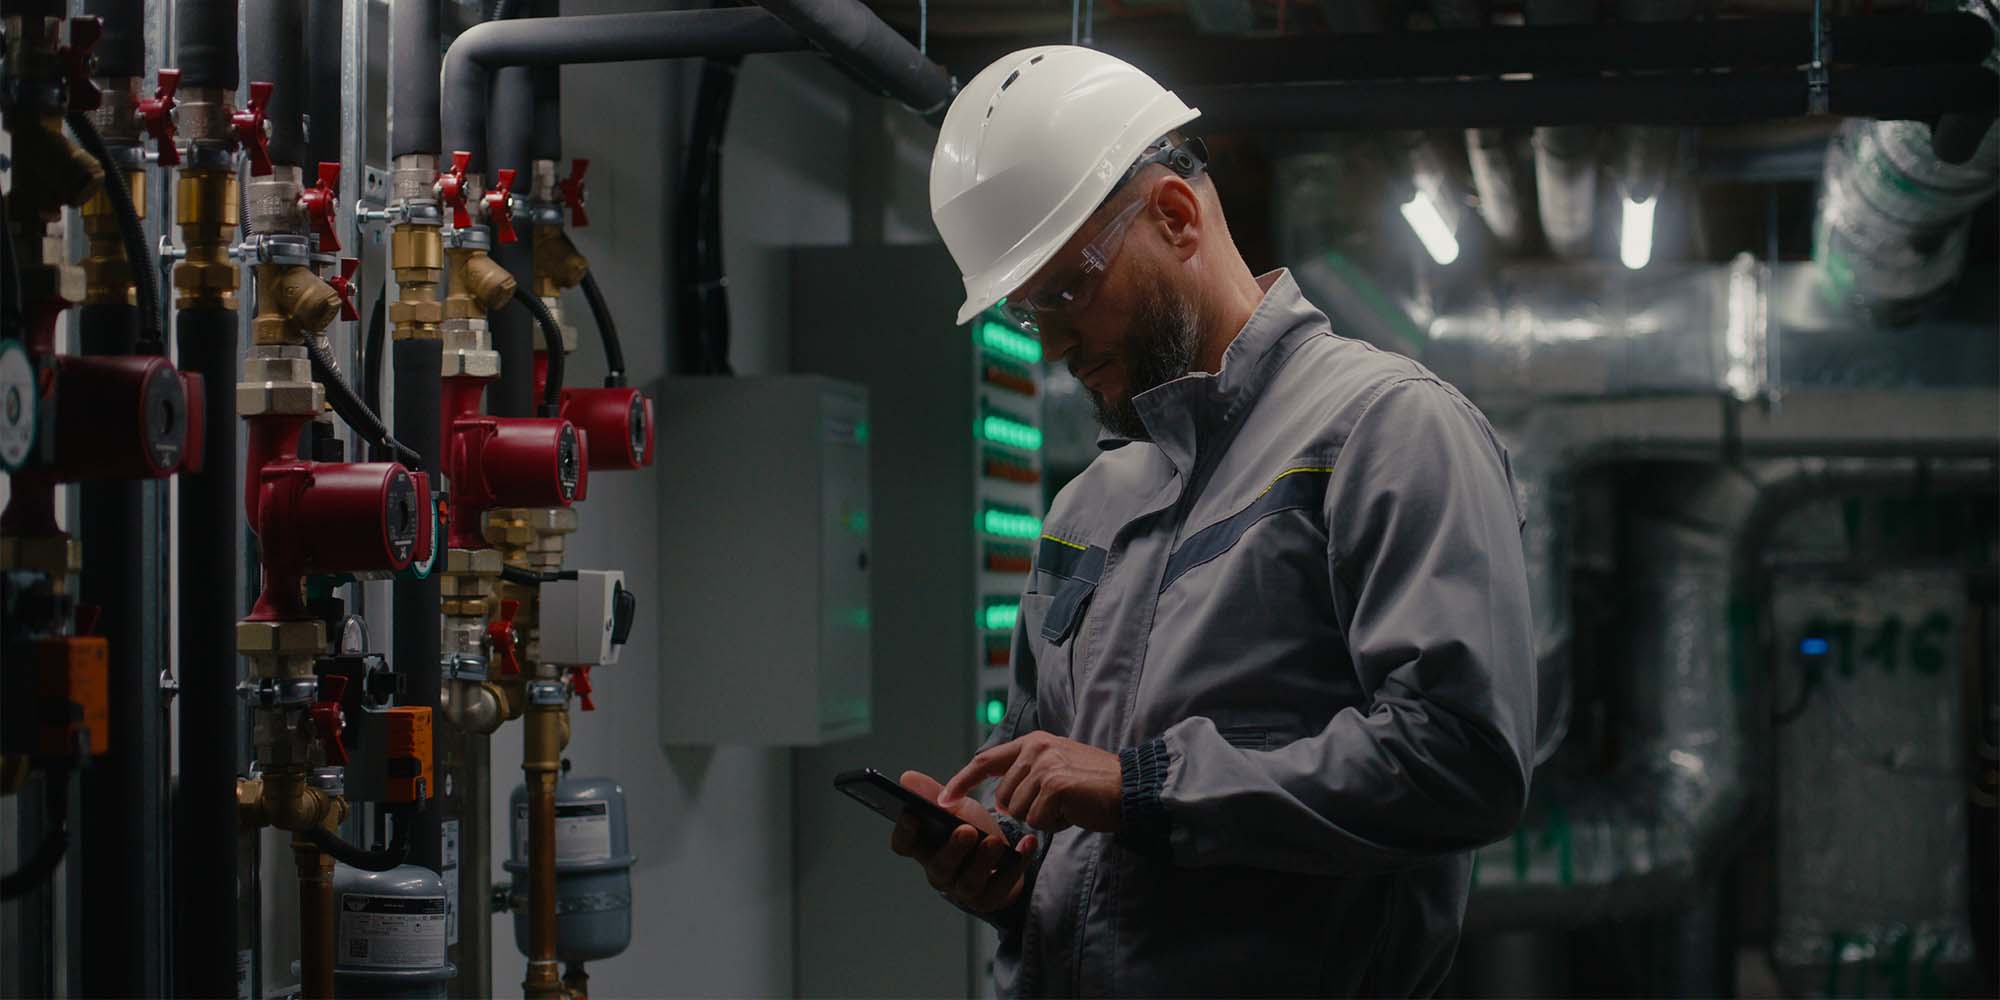 Industrial engineer in a hard hat and safety glasses using a smartphone to monitor system status in a facility with complex piping and valve systems, highlighting modern industrial workflow and remote management capabilities.